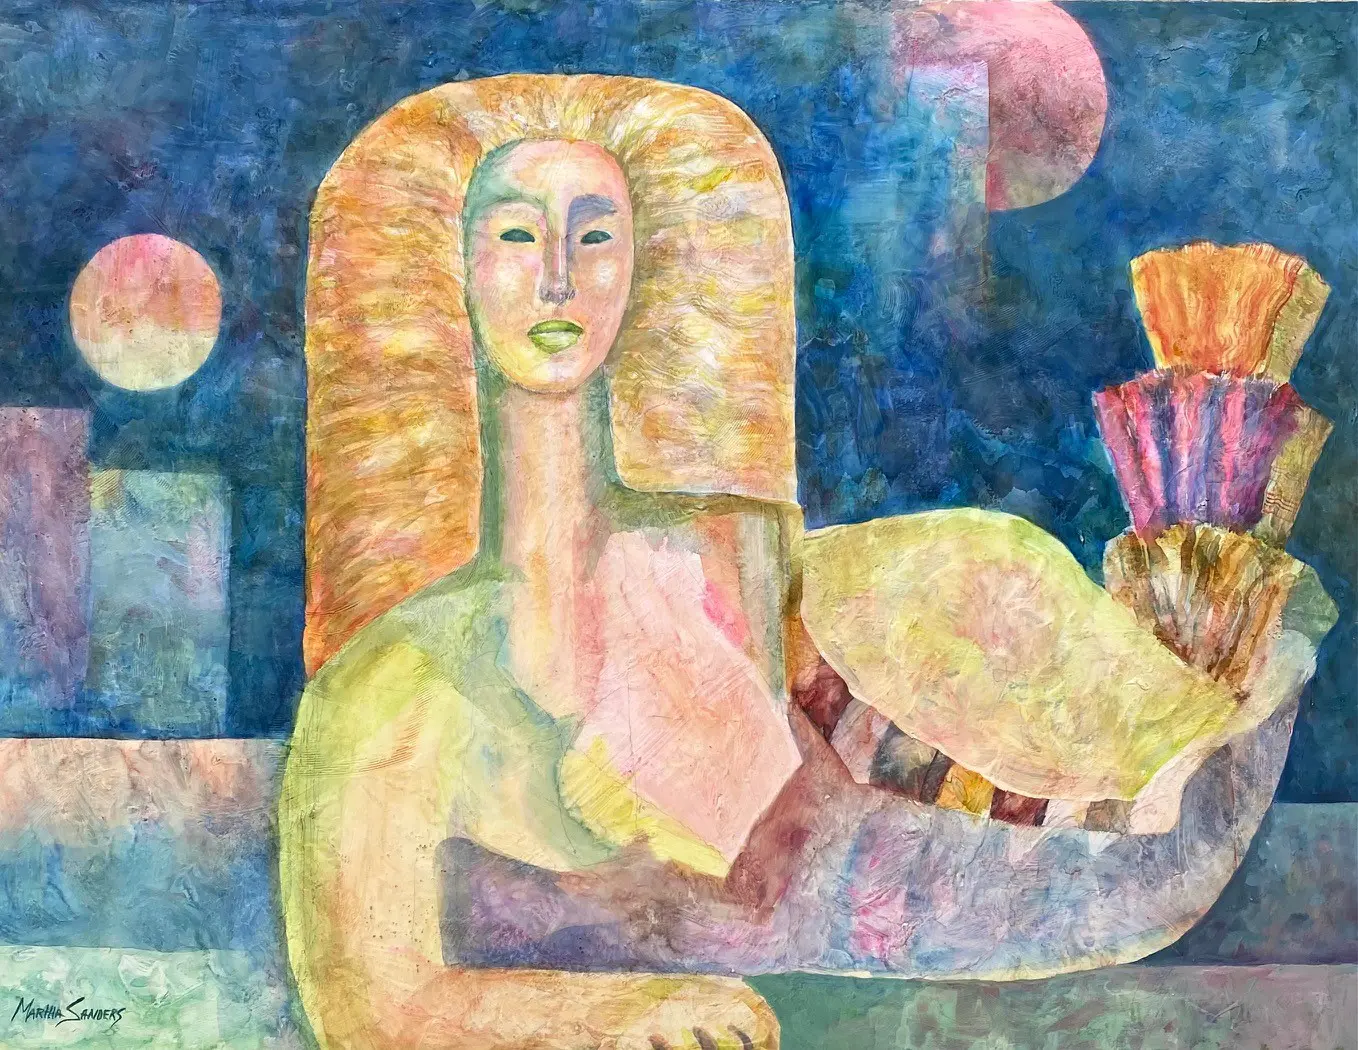 A painting of a woman holding a basket